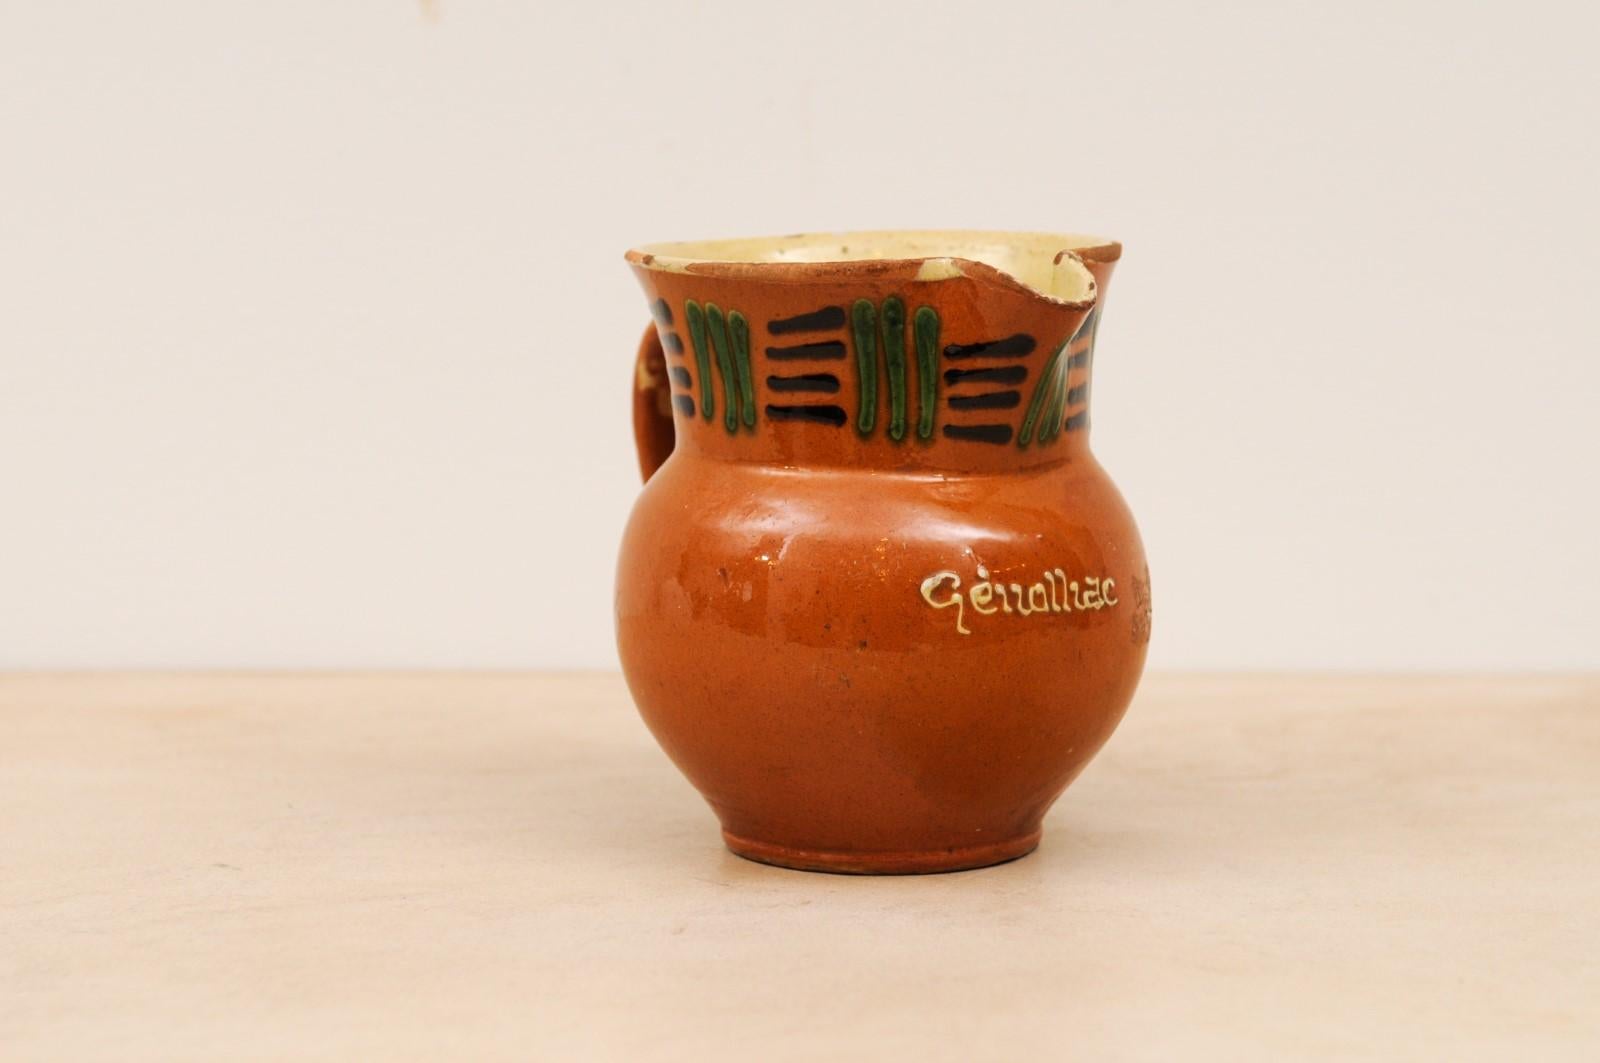 French 19th Century Terracotta Pitcher from Génolhac with Russet Colored Glaze In Good Condition For Sale In Atlanta, GA